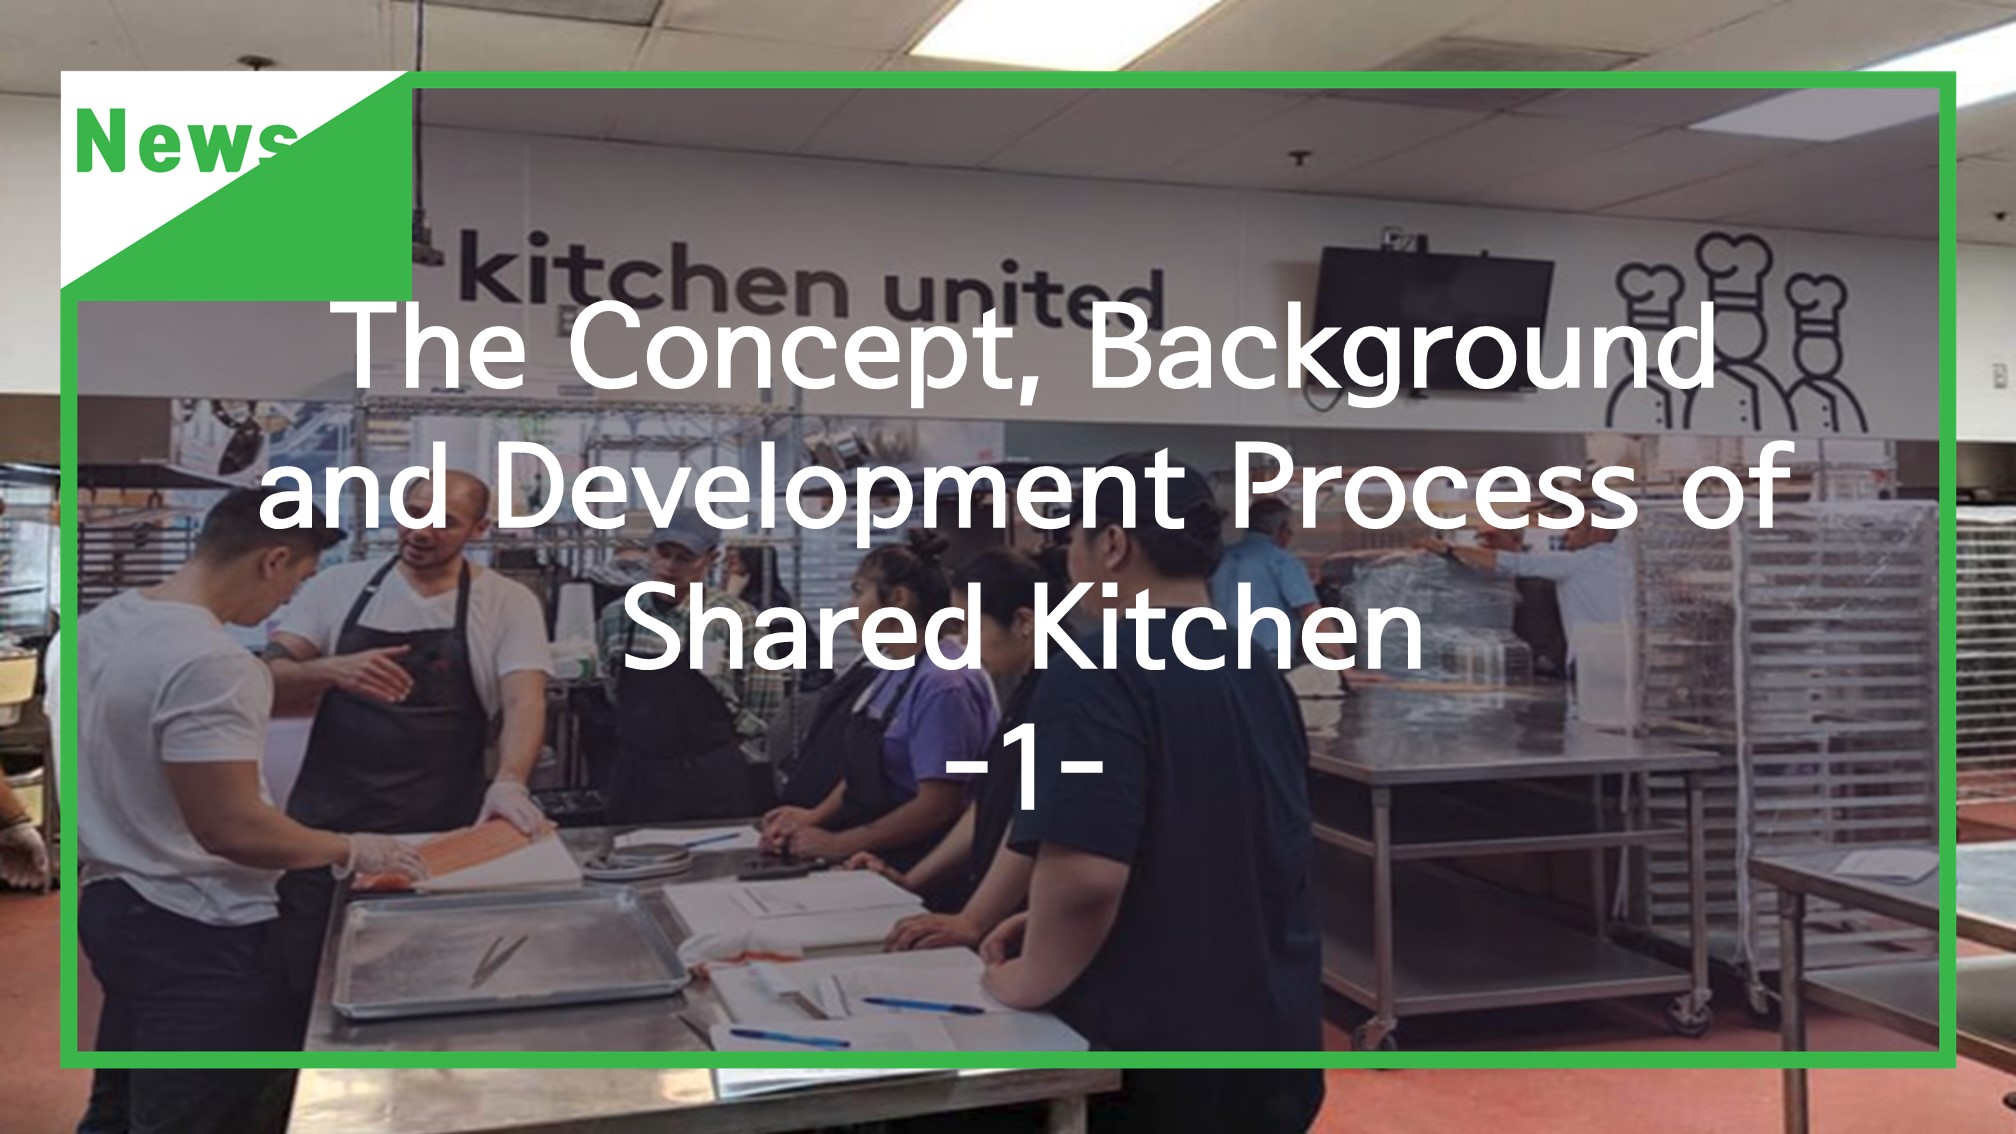 [News] The Concept, Background and Development Process of Shared Kitchen